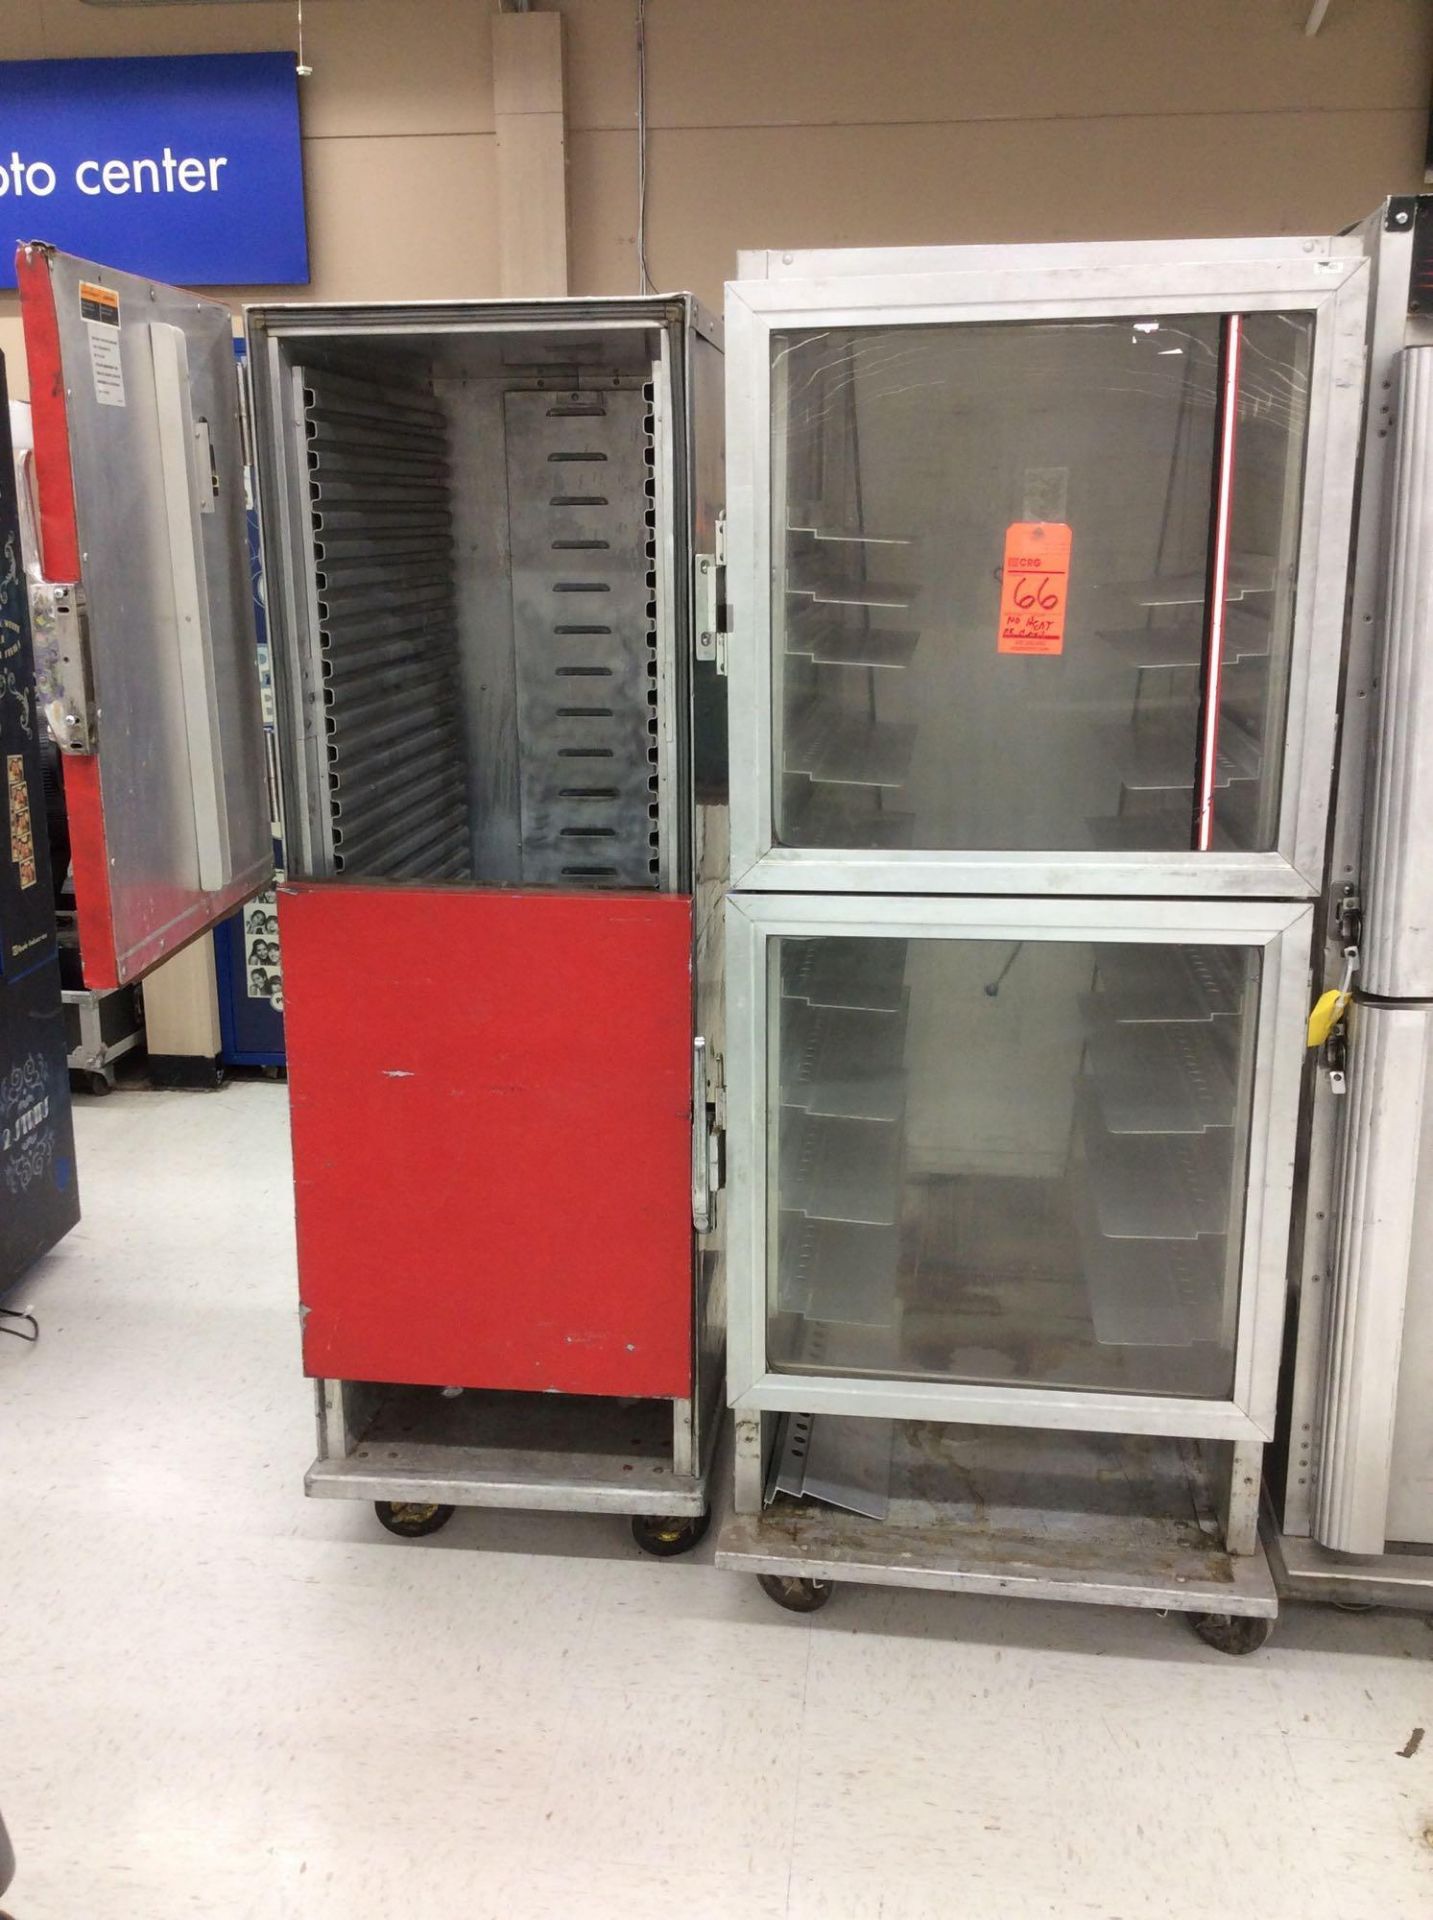 Lot of (2) portable food tray transports - (1) holds 33 trays, other holds 8 large trays and has